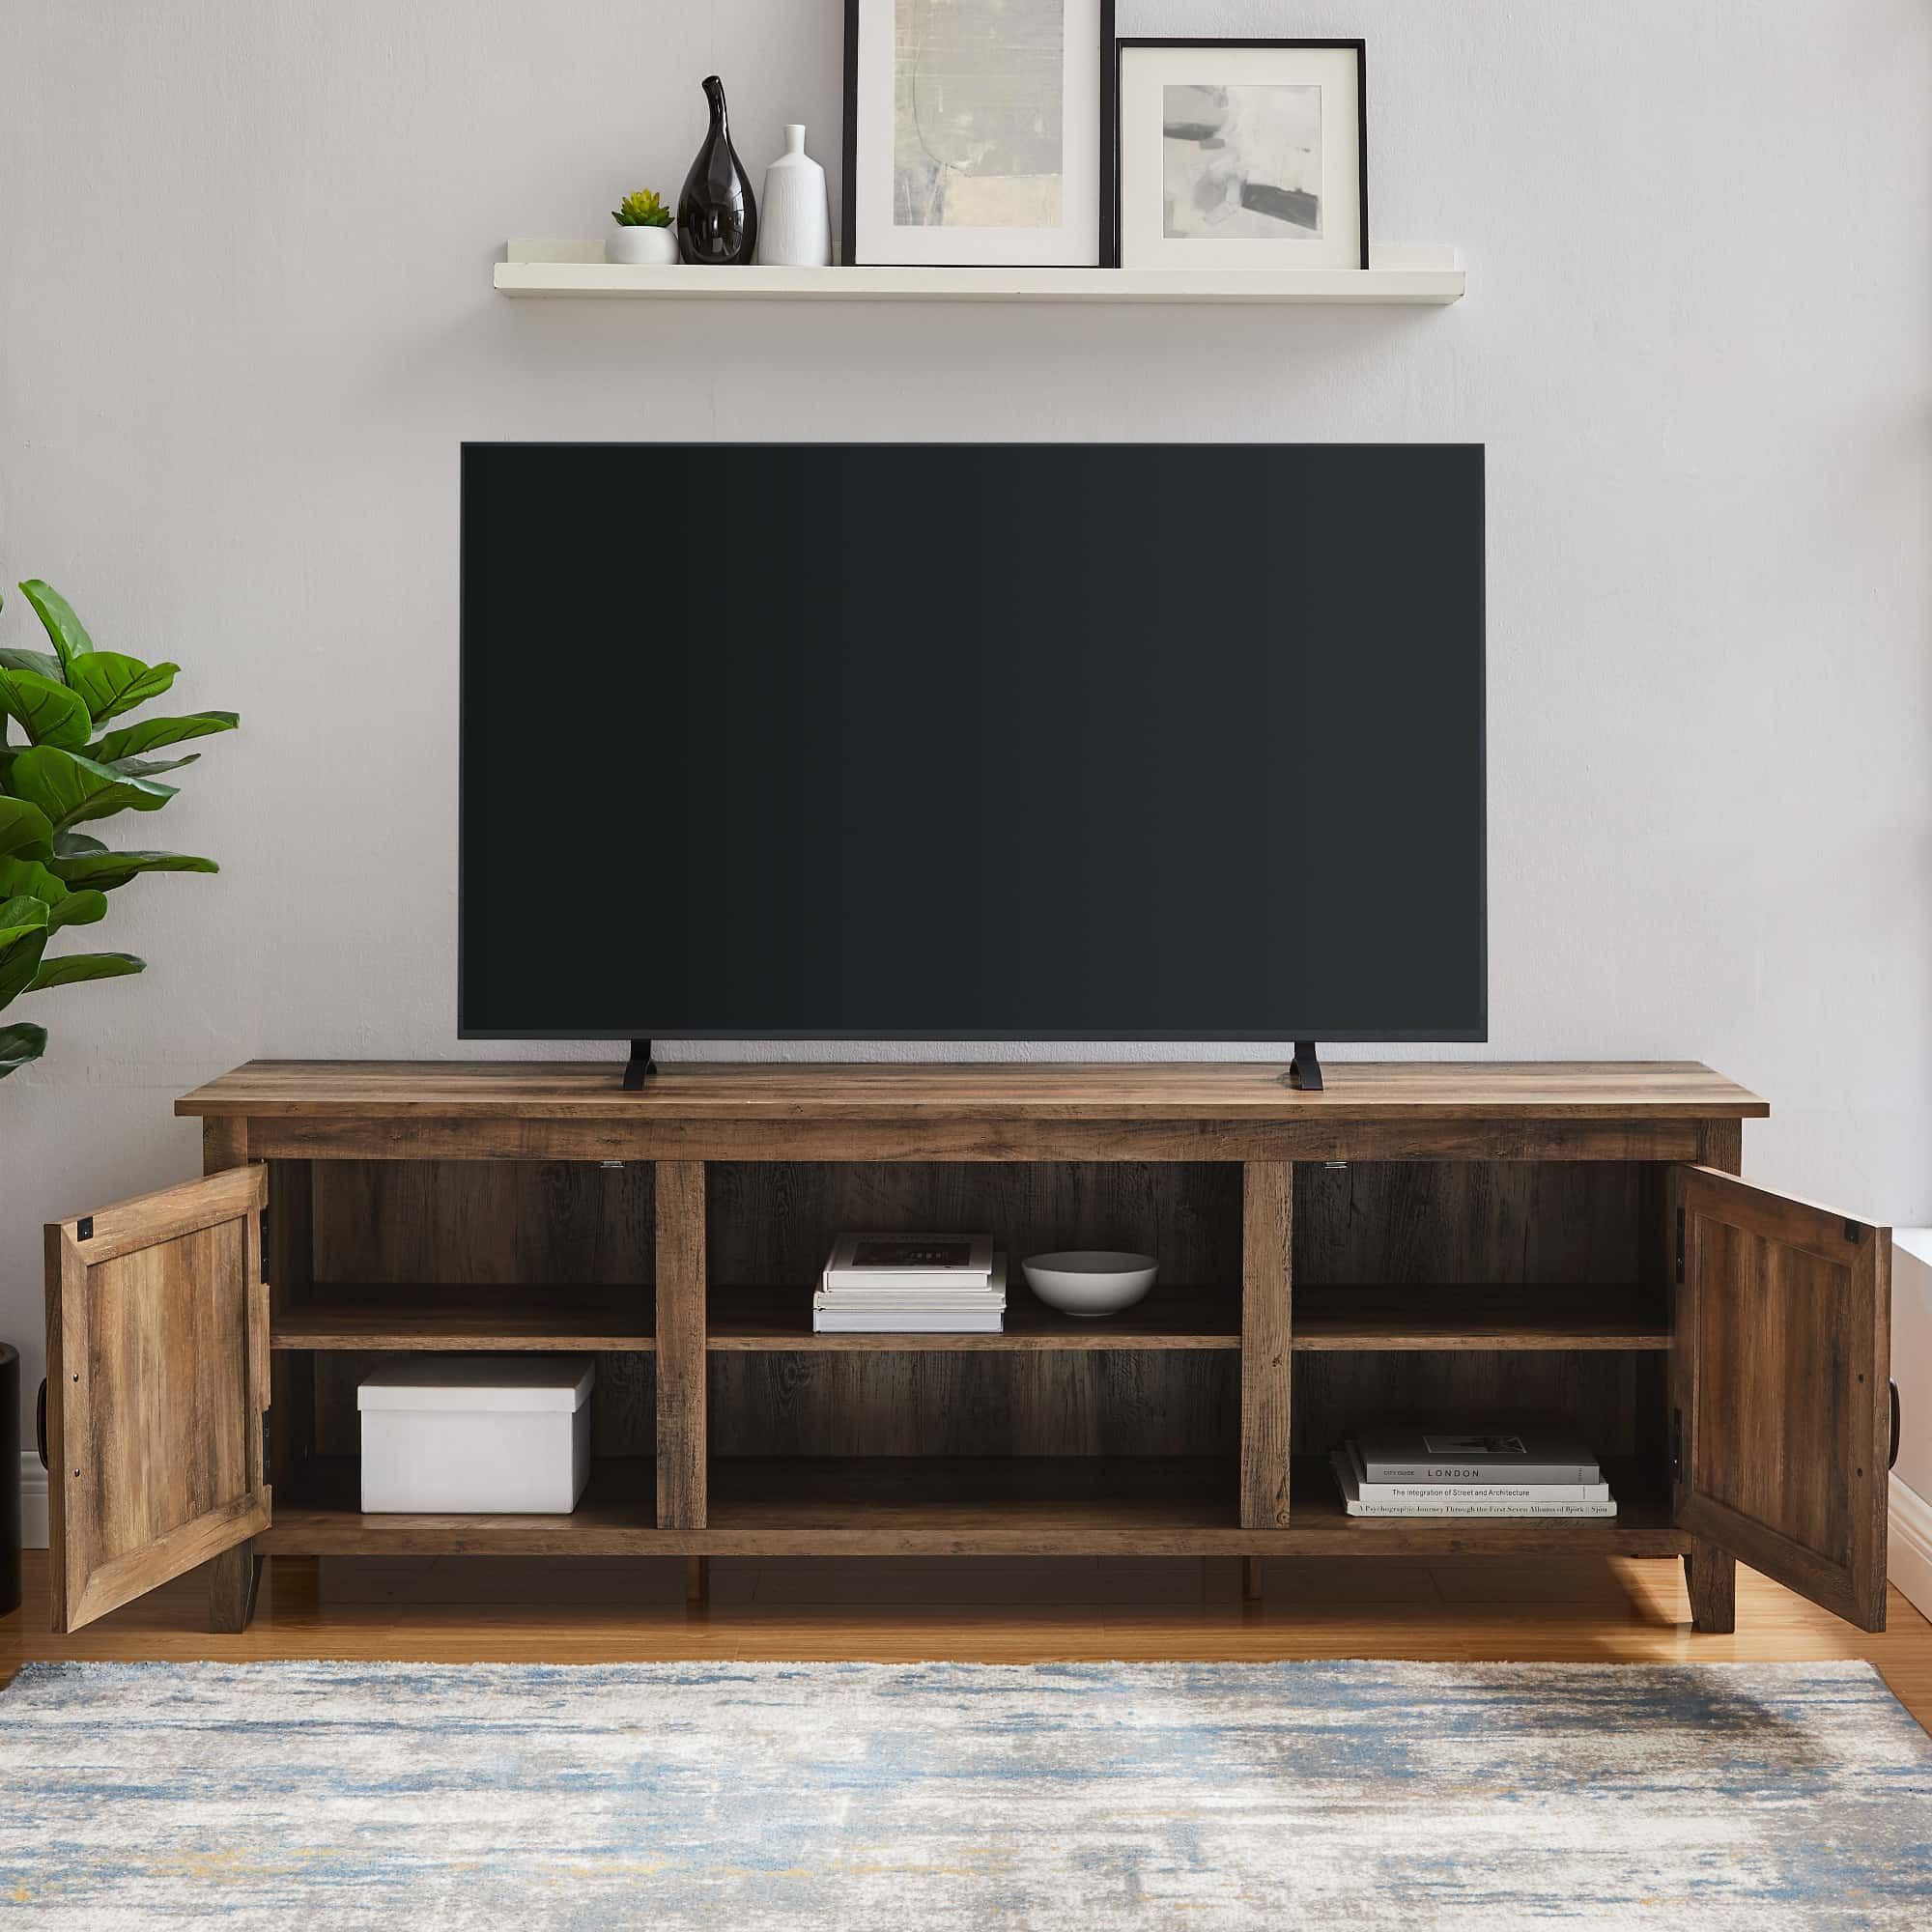 70 Inch Modern Farmhouse Wood Tv Stand – Rustic Oakwalker Edison Pertaining To Farmhouse Tv Stands For 70 Inch Tv (Gallery 3 of 20)